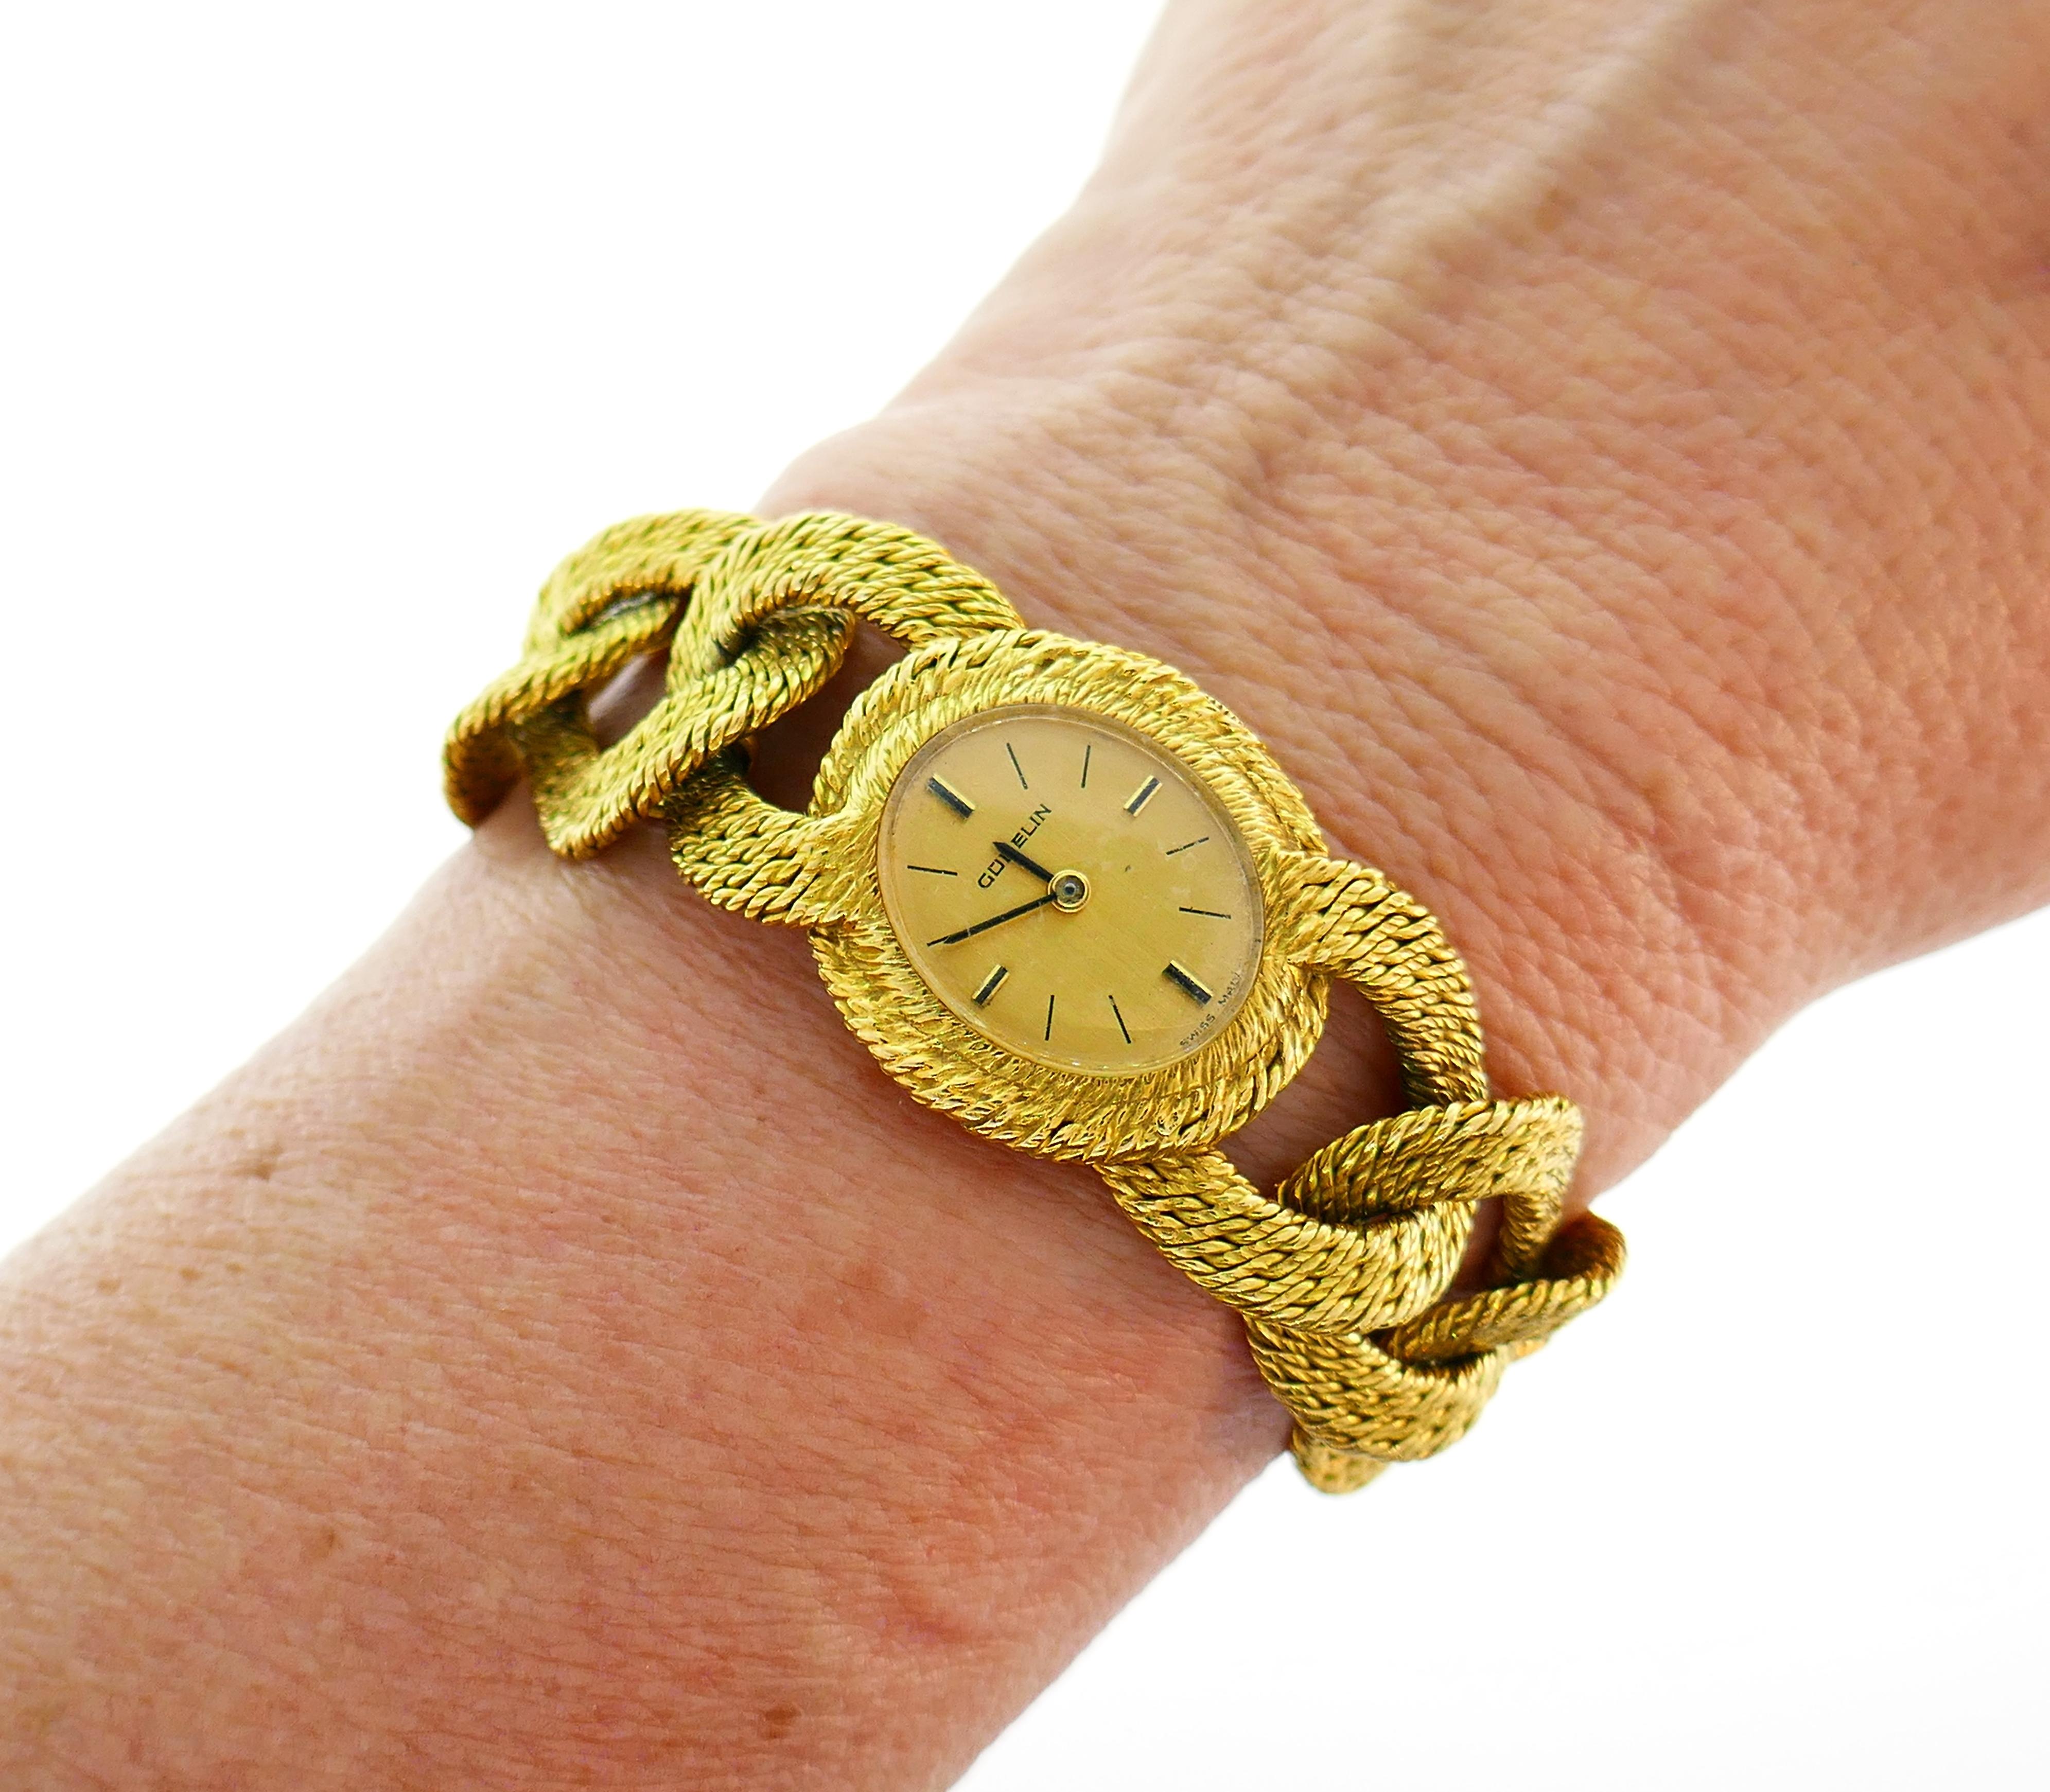 Classy and elegant lady's watch. Textured gold, three-dimensional oval link and timeless design make this watch to be worn every day and be enjoyed for many years.
The watch is made of 18 karat yellow gold and has a Swiss made mechanical movement